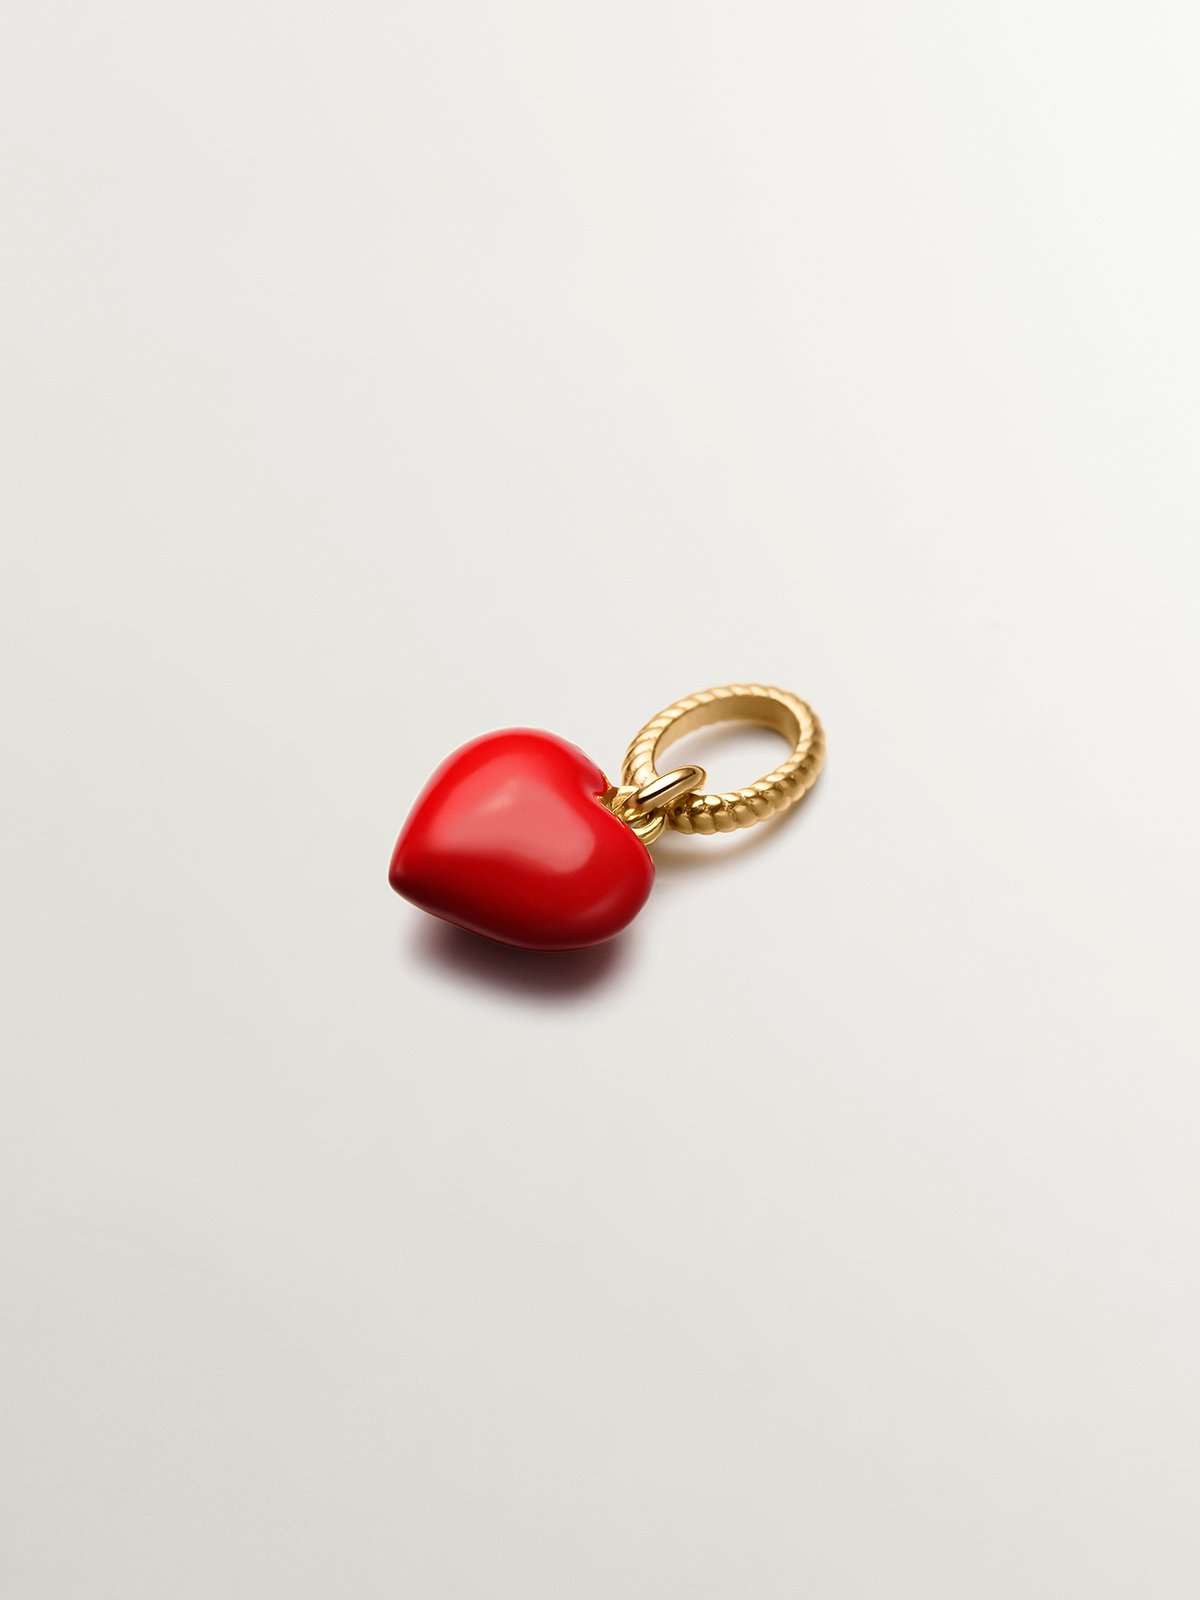 925 silver charm bathed in 18k yellow gold and red enamel shape